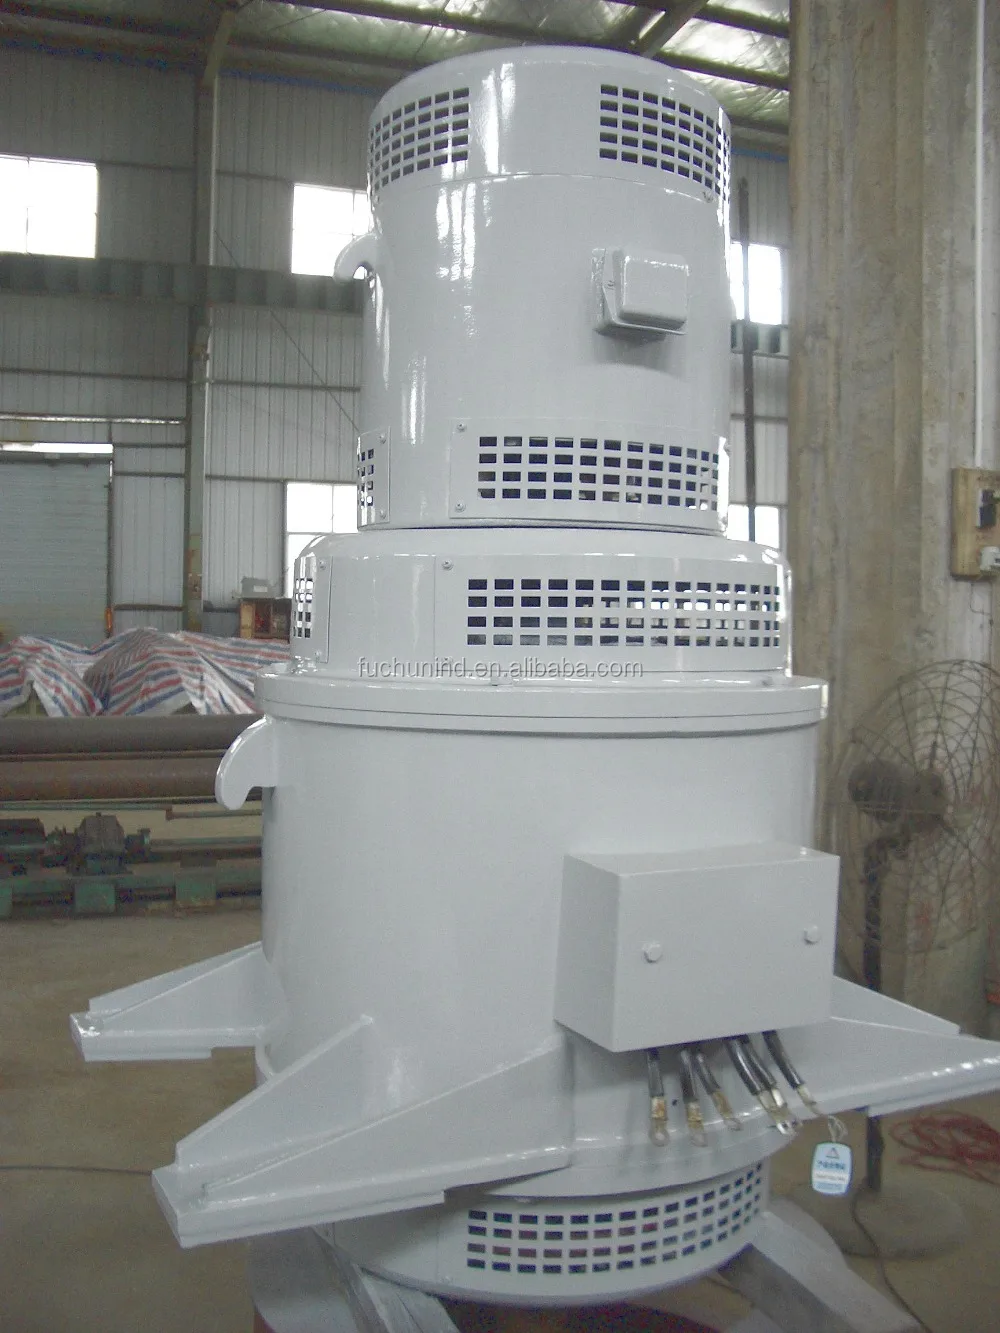 100kw Small Vertical Kaplan Turbine For Hydropower Project - Buy Kaplan